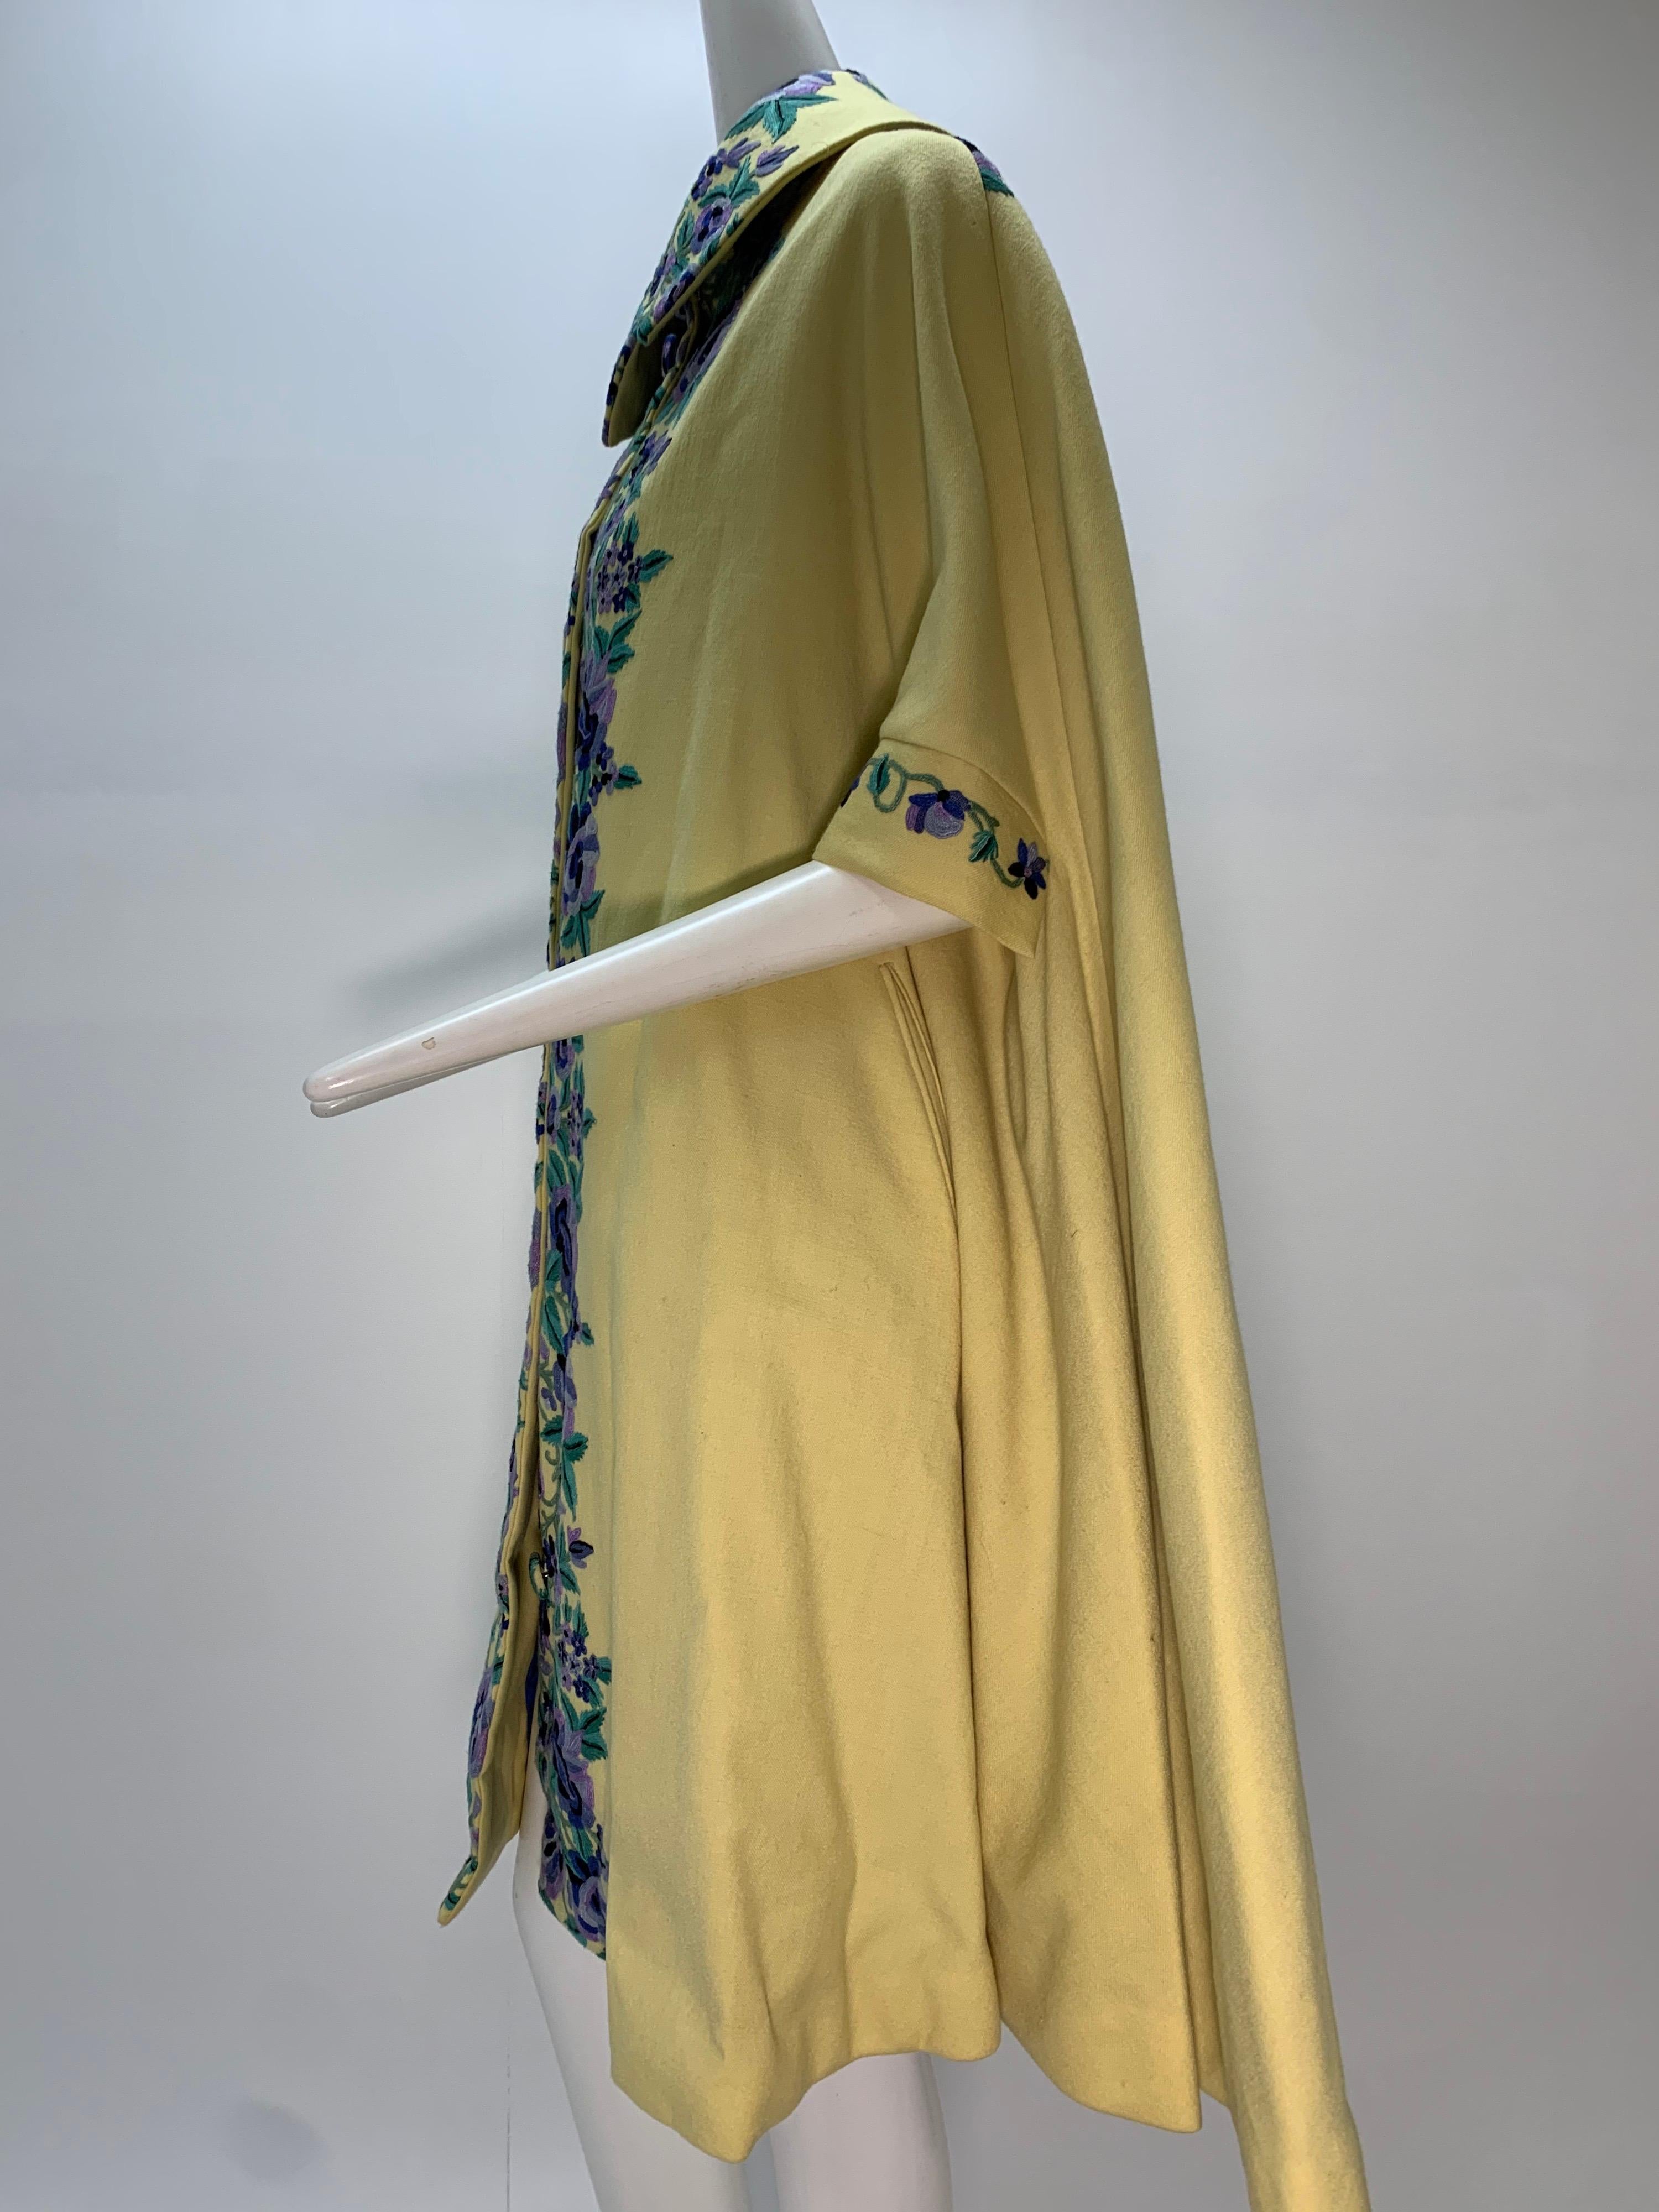 1960s Profils Du Monde Citrine Wool Swing Coat W/ Crewel Floral Embroidery Front For Sale 2